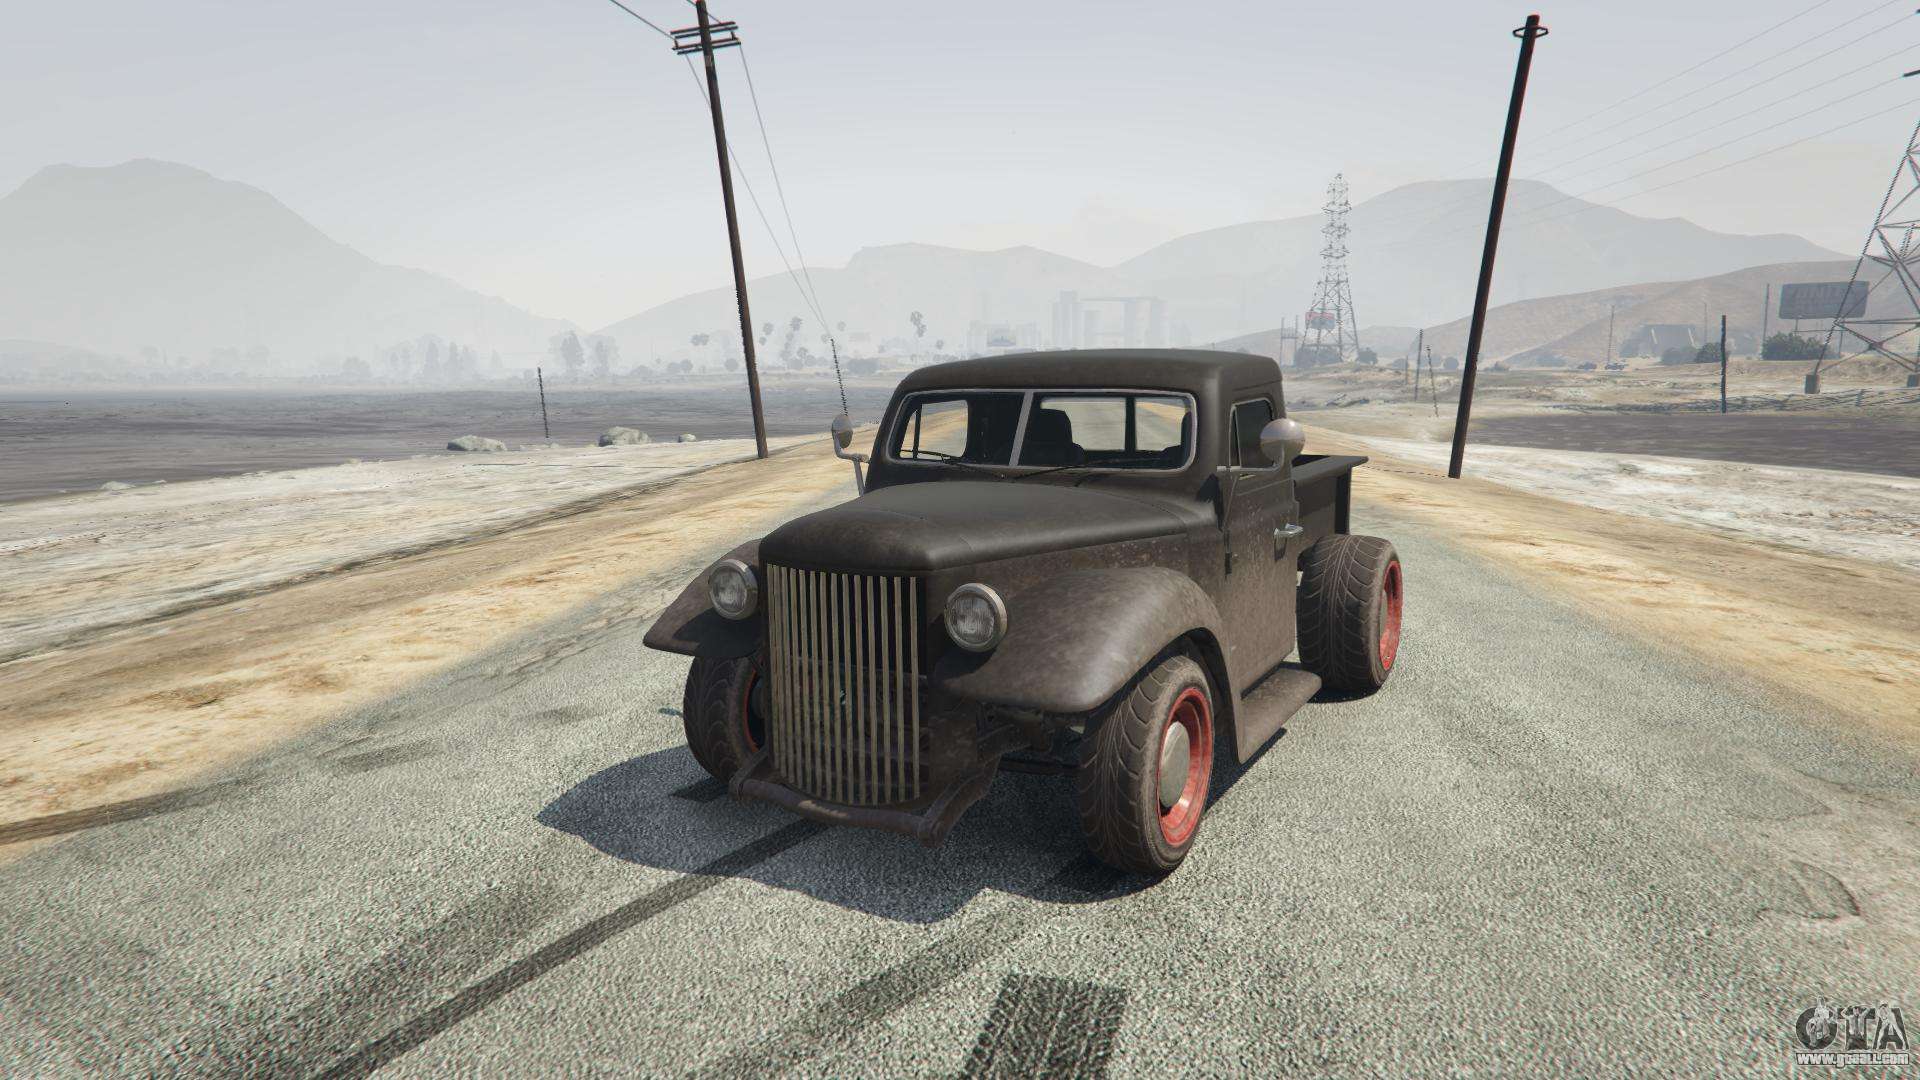 Rat-Truck from GTA 5 - front view